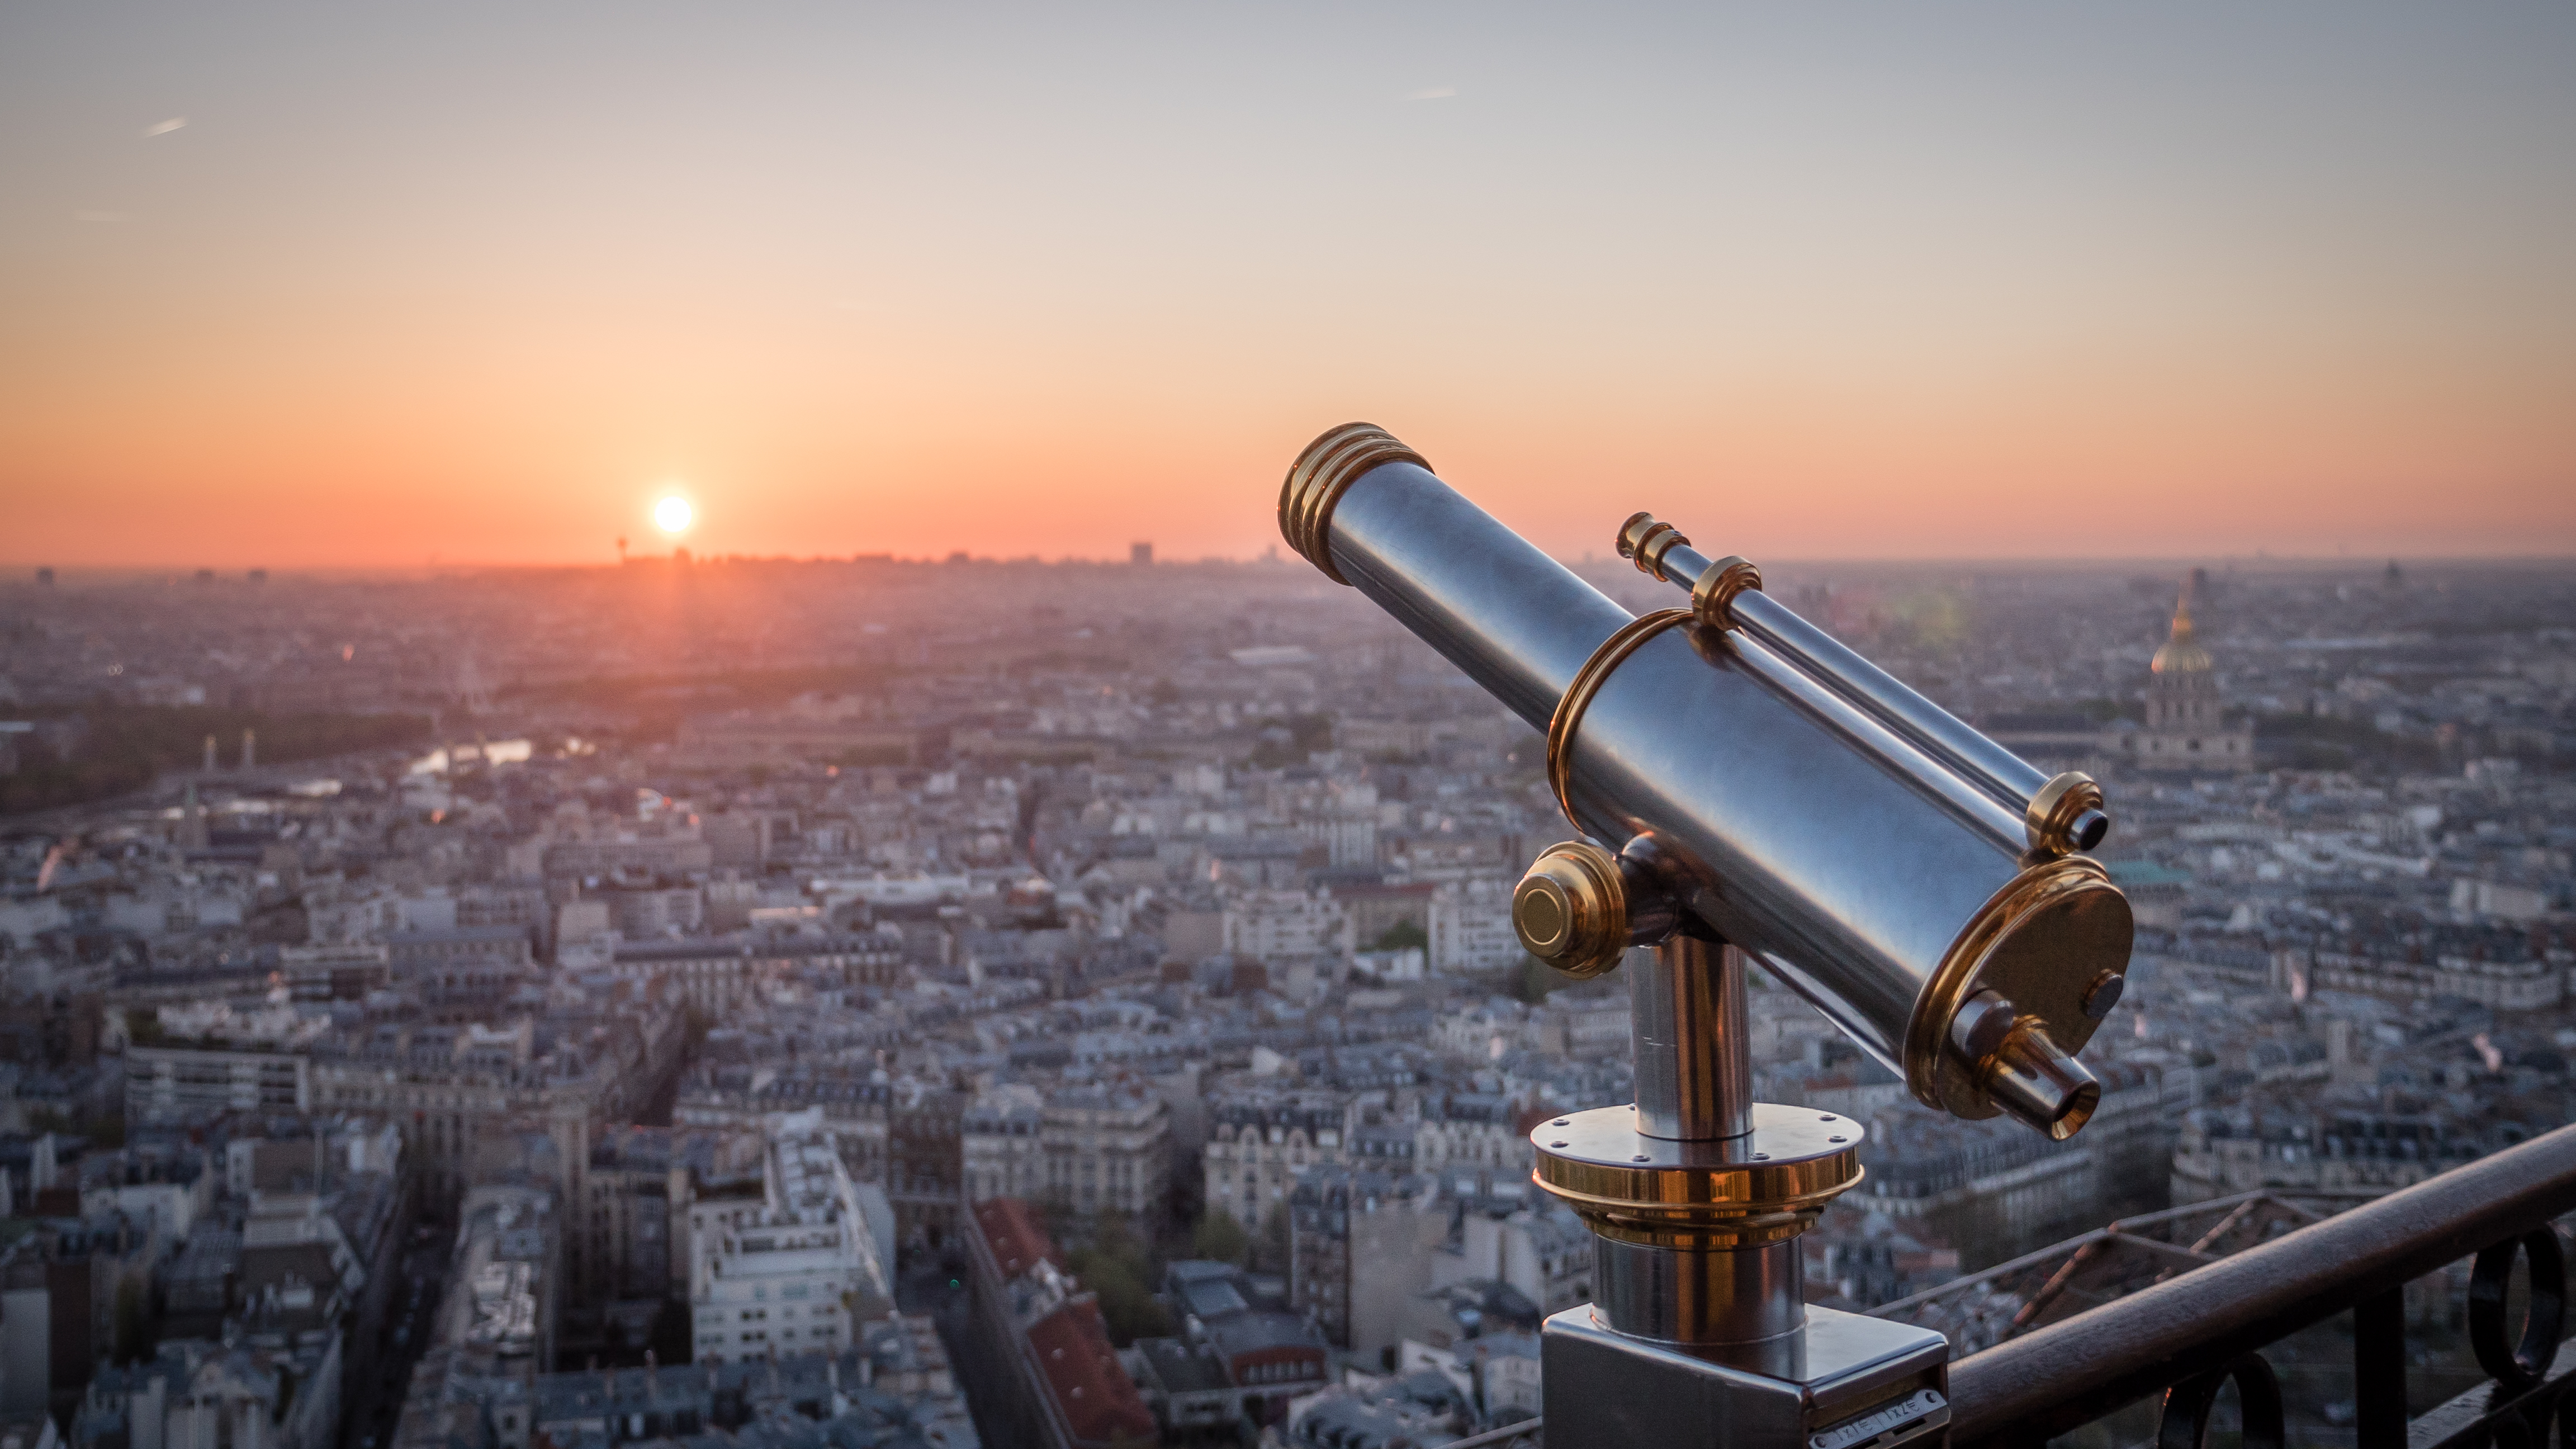 Eiffel Tower view at sunrise